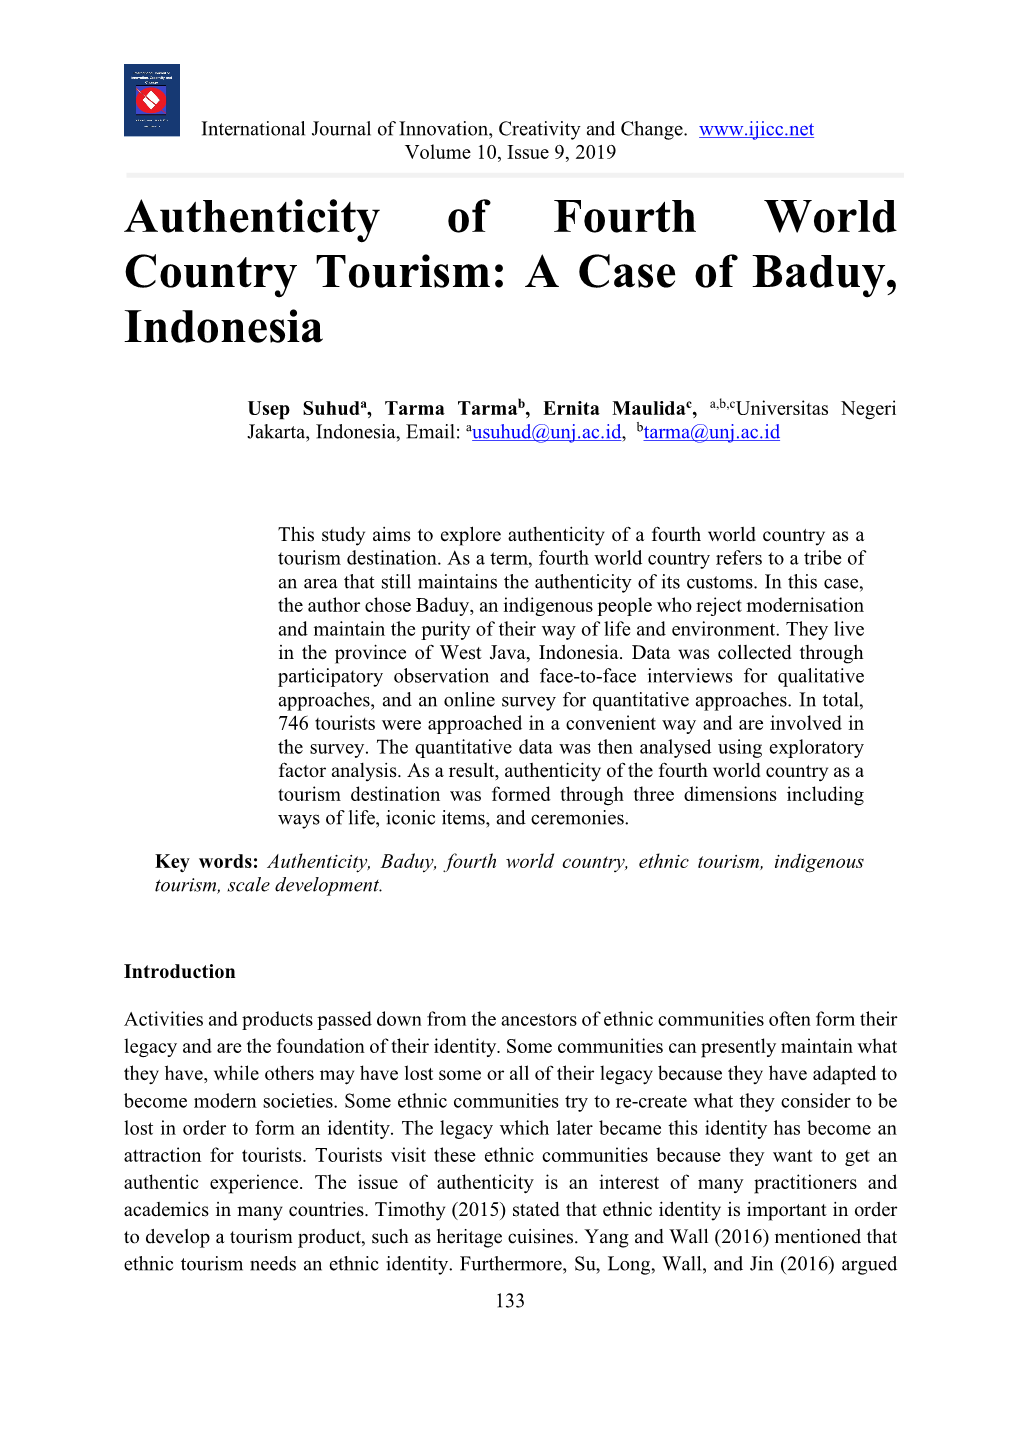 Authenticity of Fourth World Country Tourism: a Case of Baduy, Indonesia